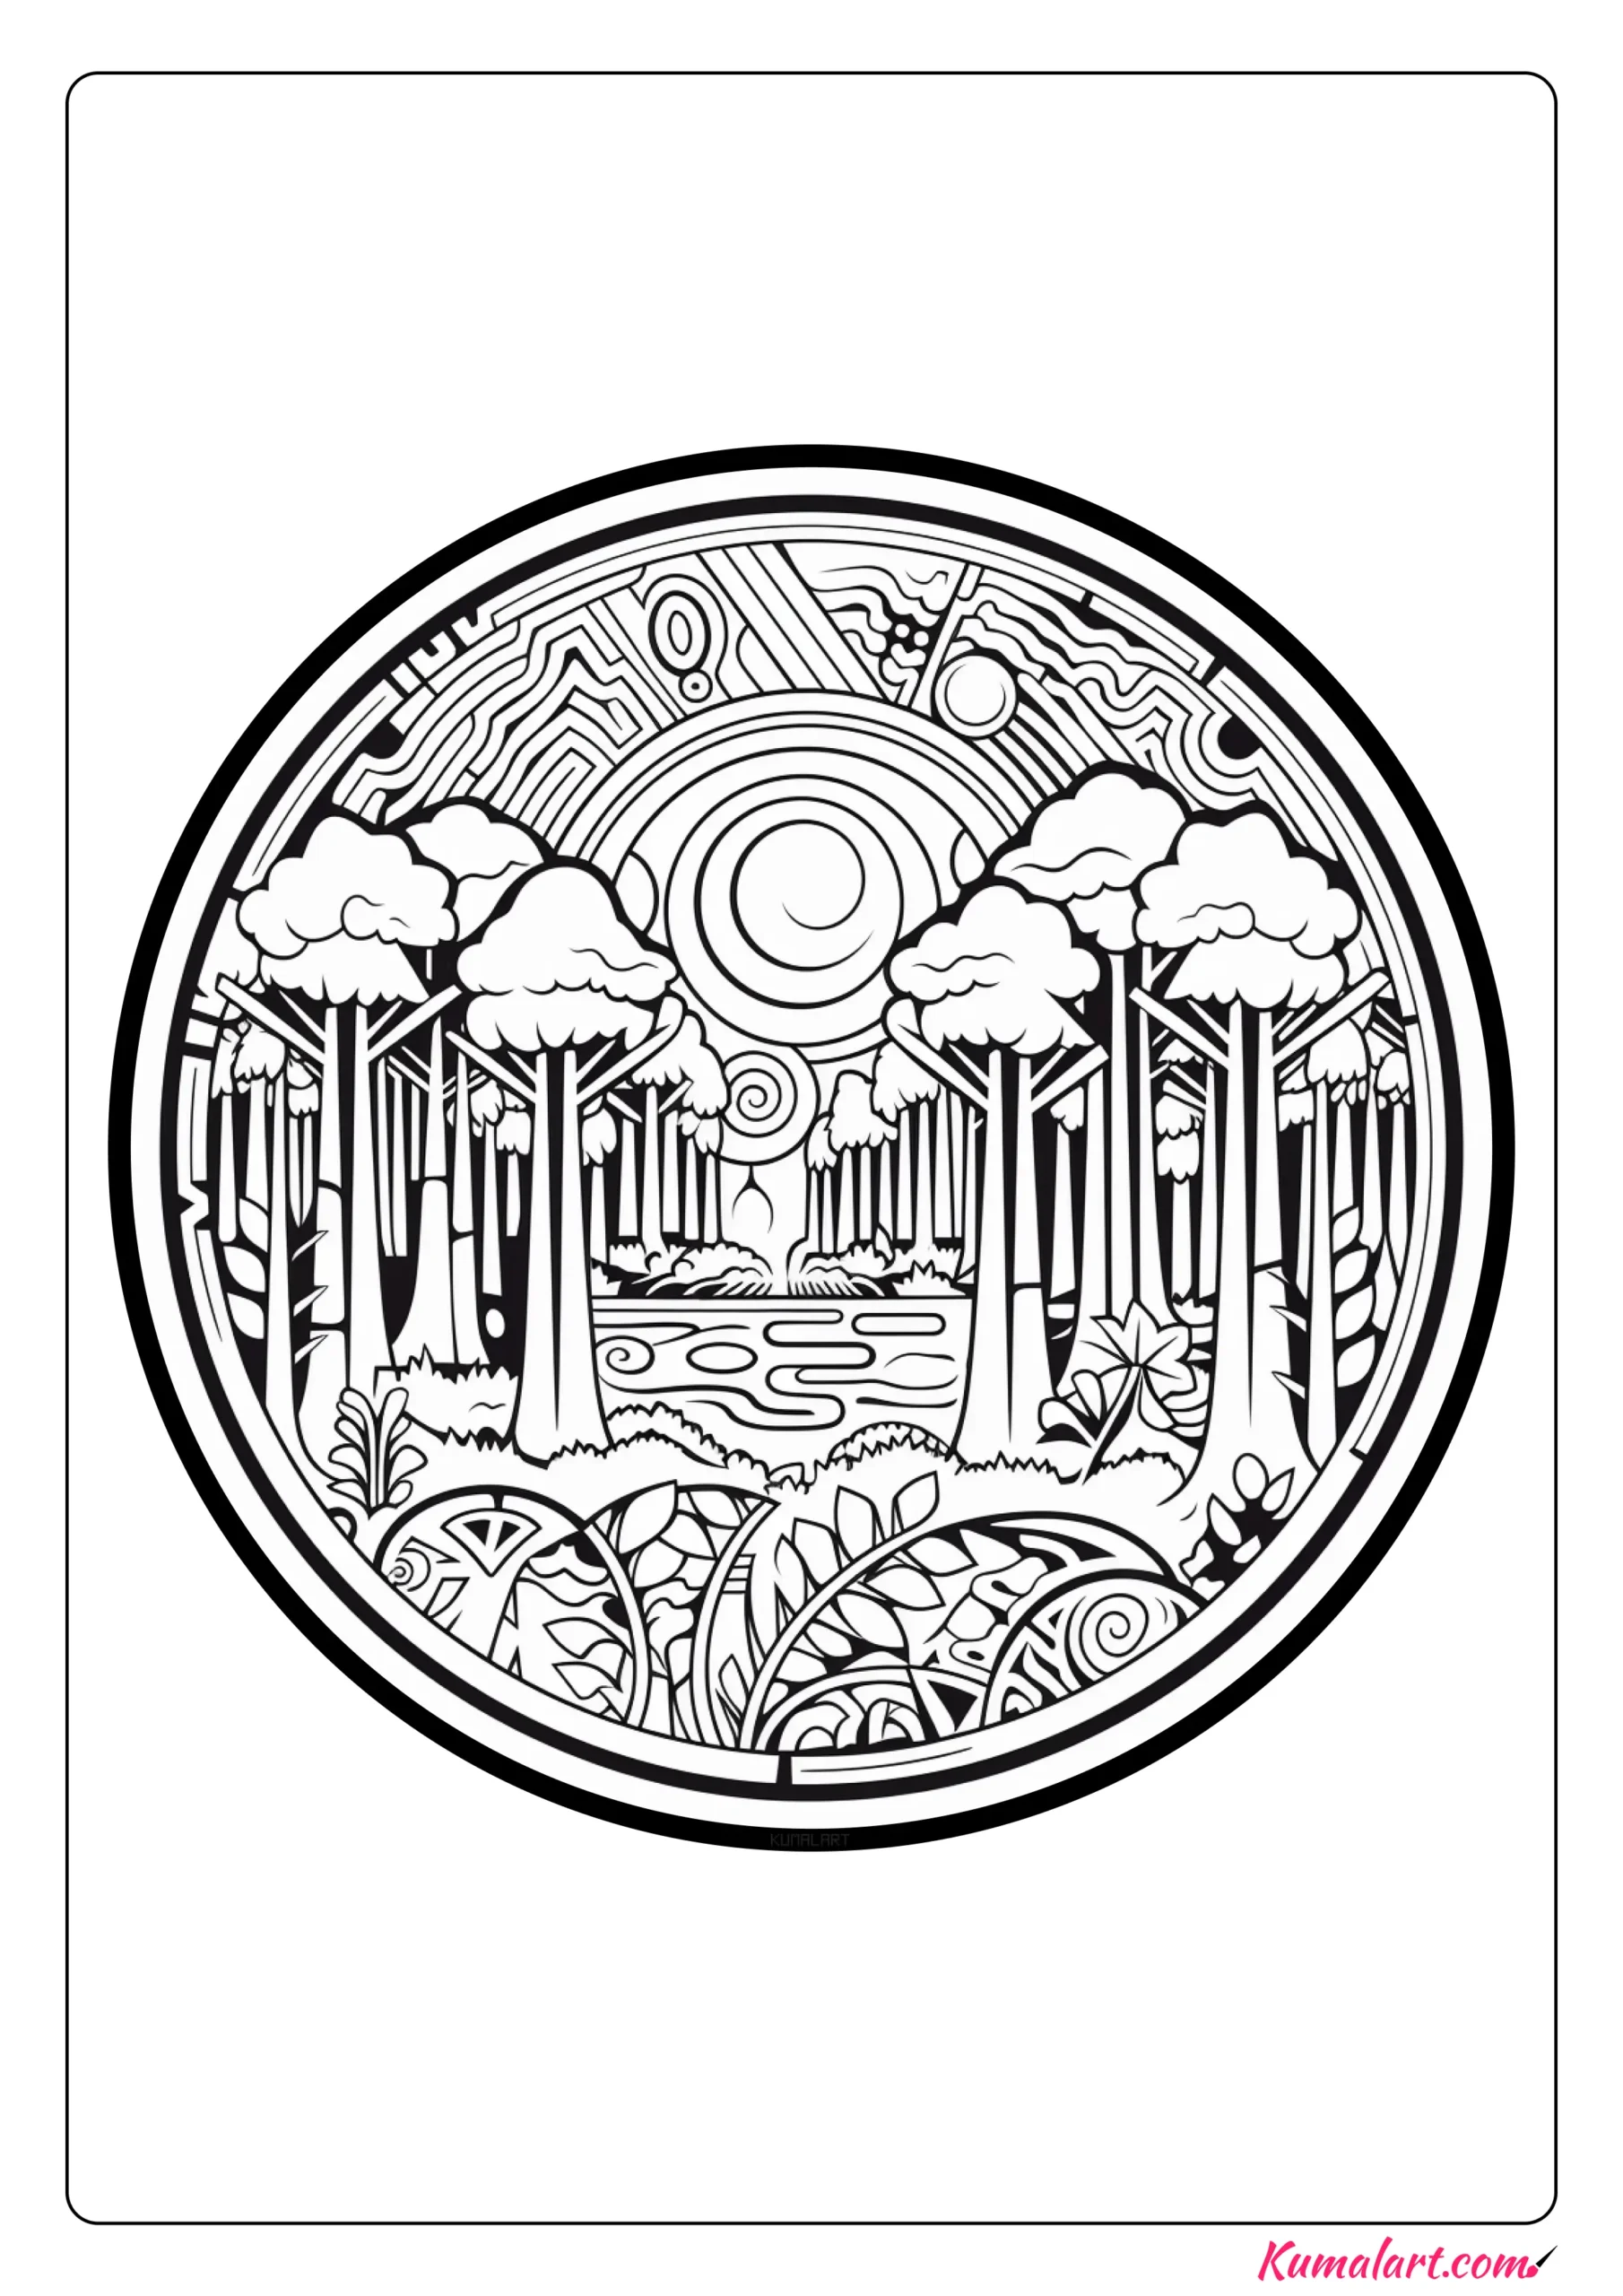 Magical Rainforest Coloring Page